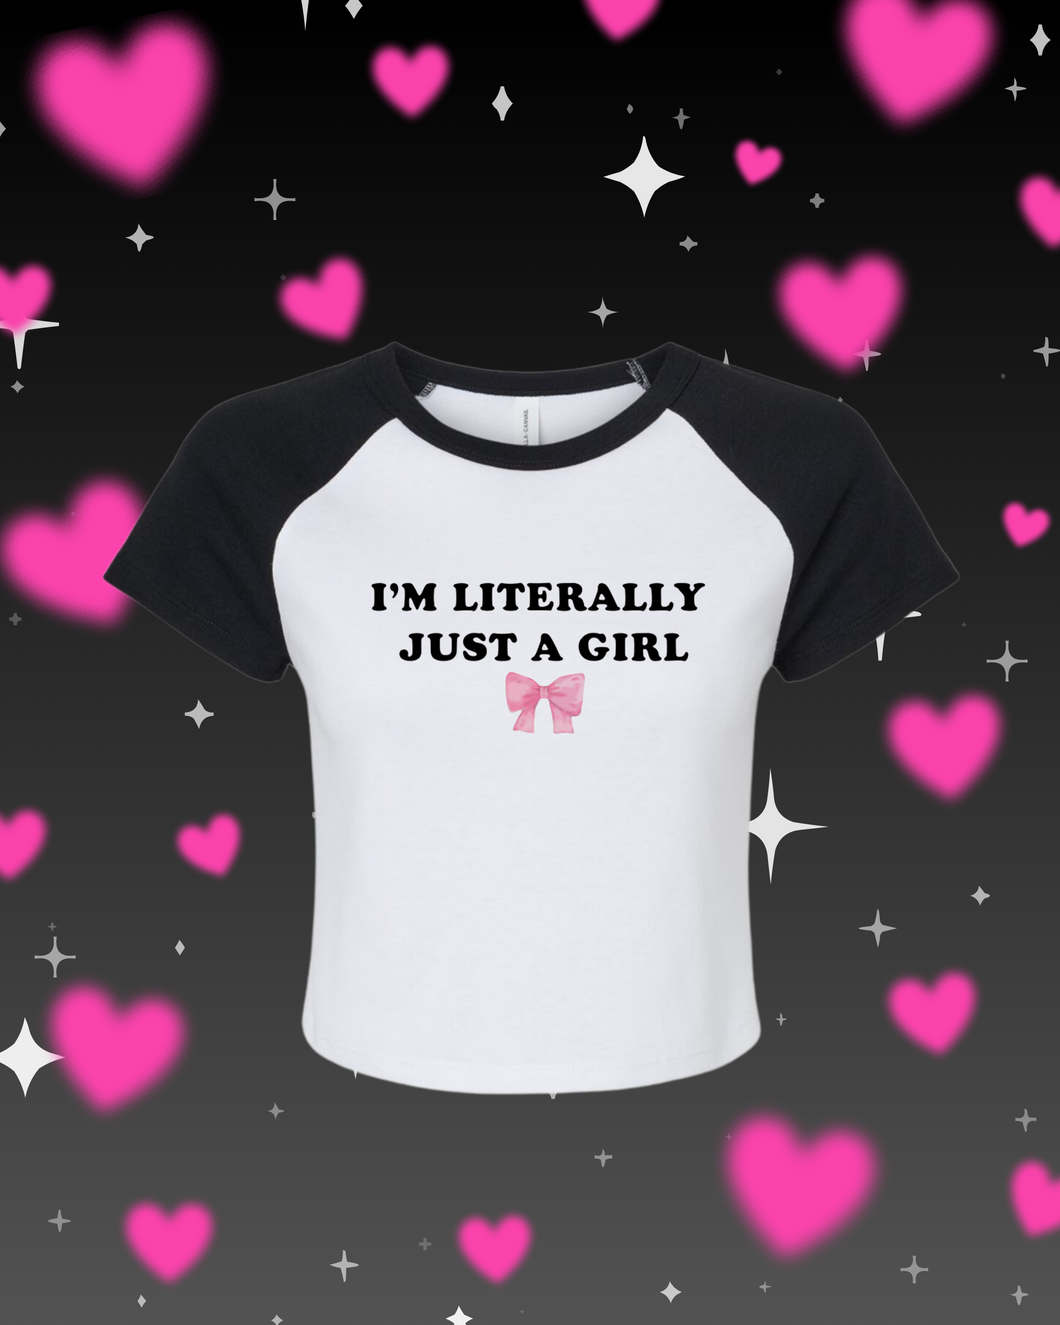 Just a Girl Baby Tee